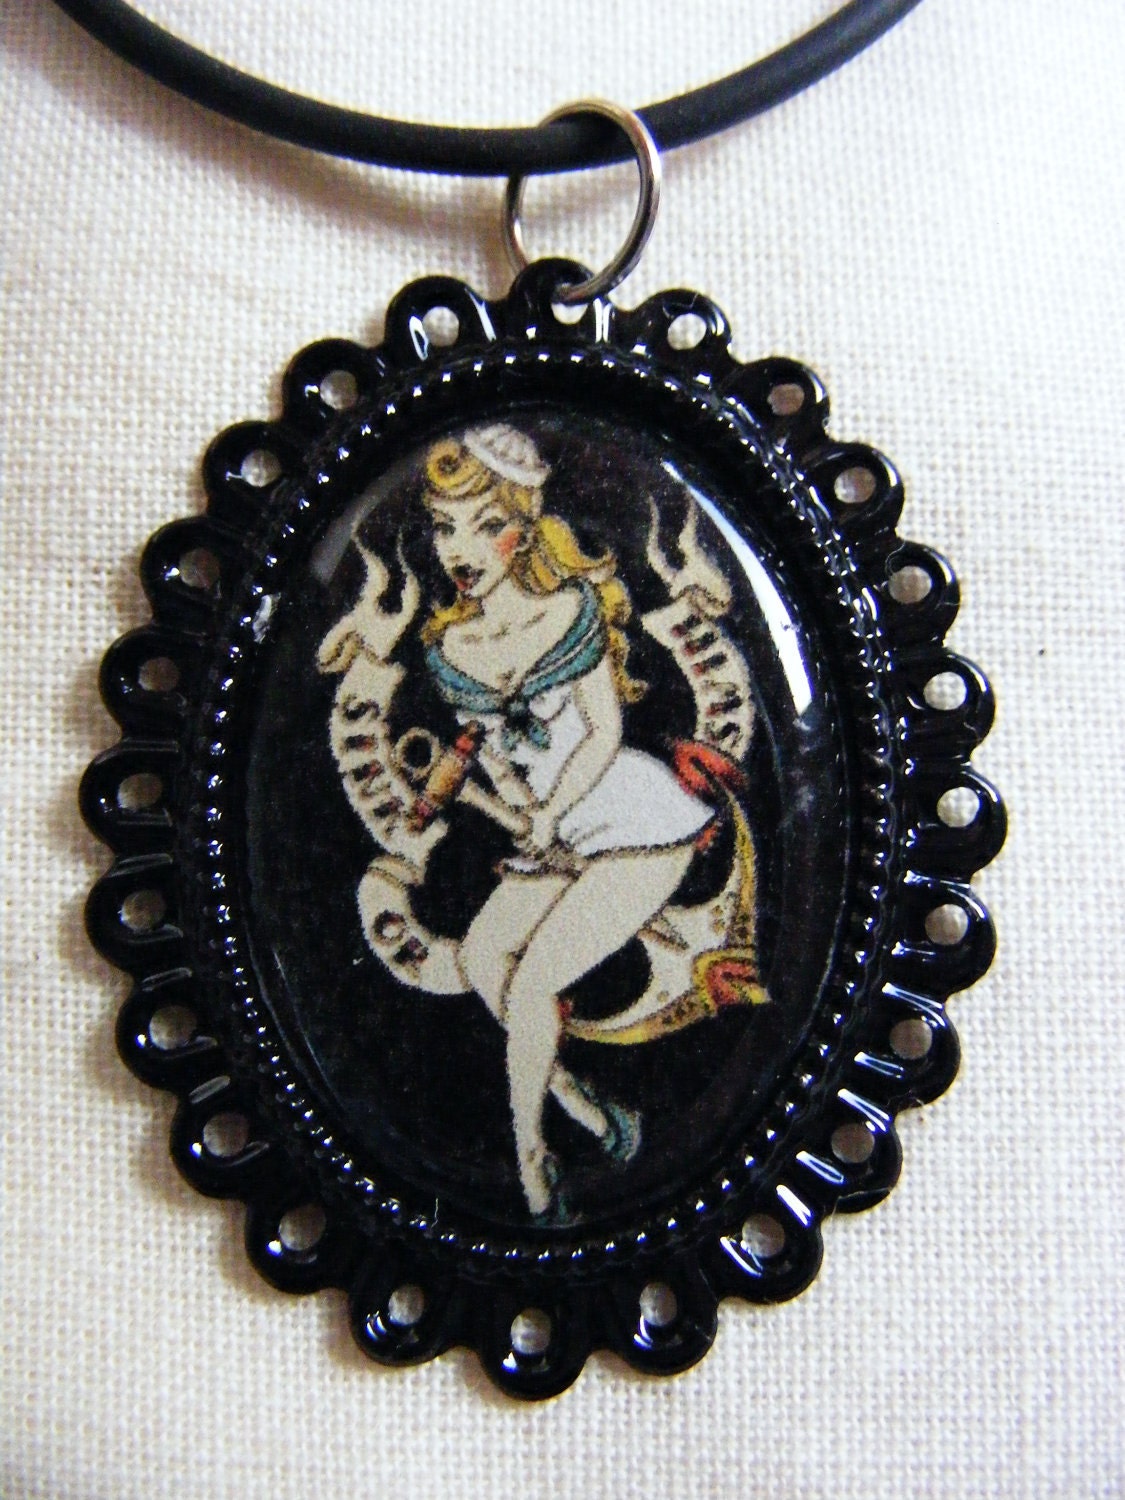 Rockabilly tattoo sailor jerry necklace pin-up girl. From thecutealternative